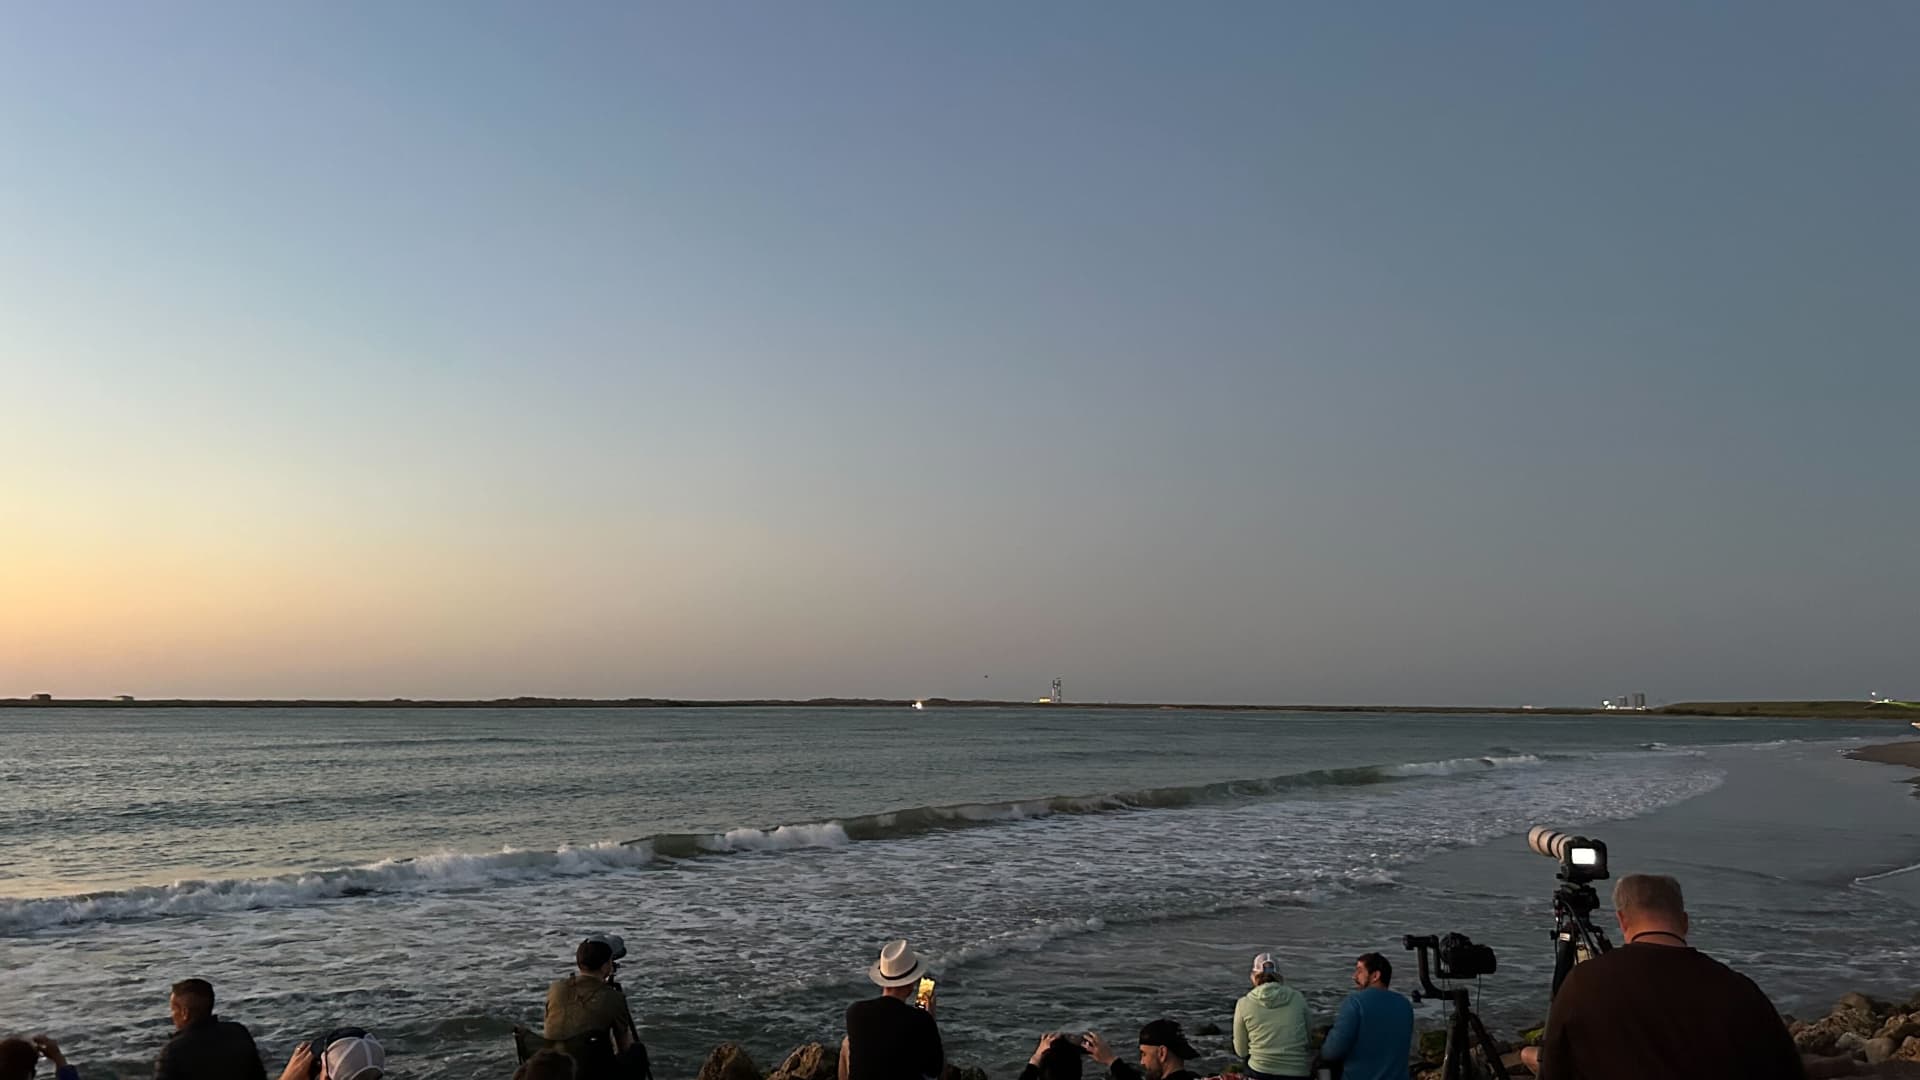 Members of the press gather on South Padre Island, about 5 miles from SpaceX's private Starship facility, for the first attempt at orbital launch on Monday, April 17, 2023.